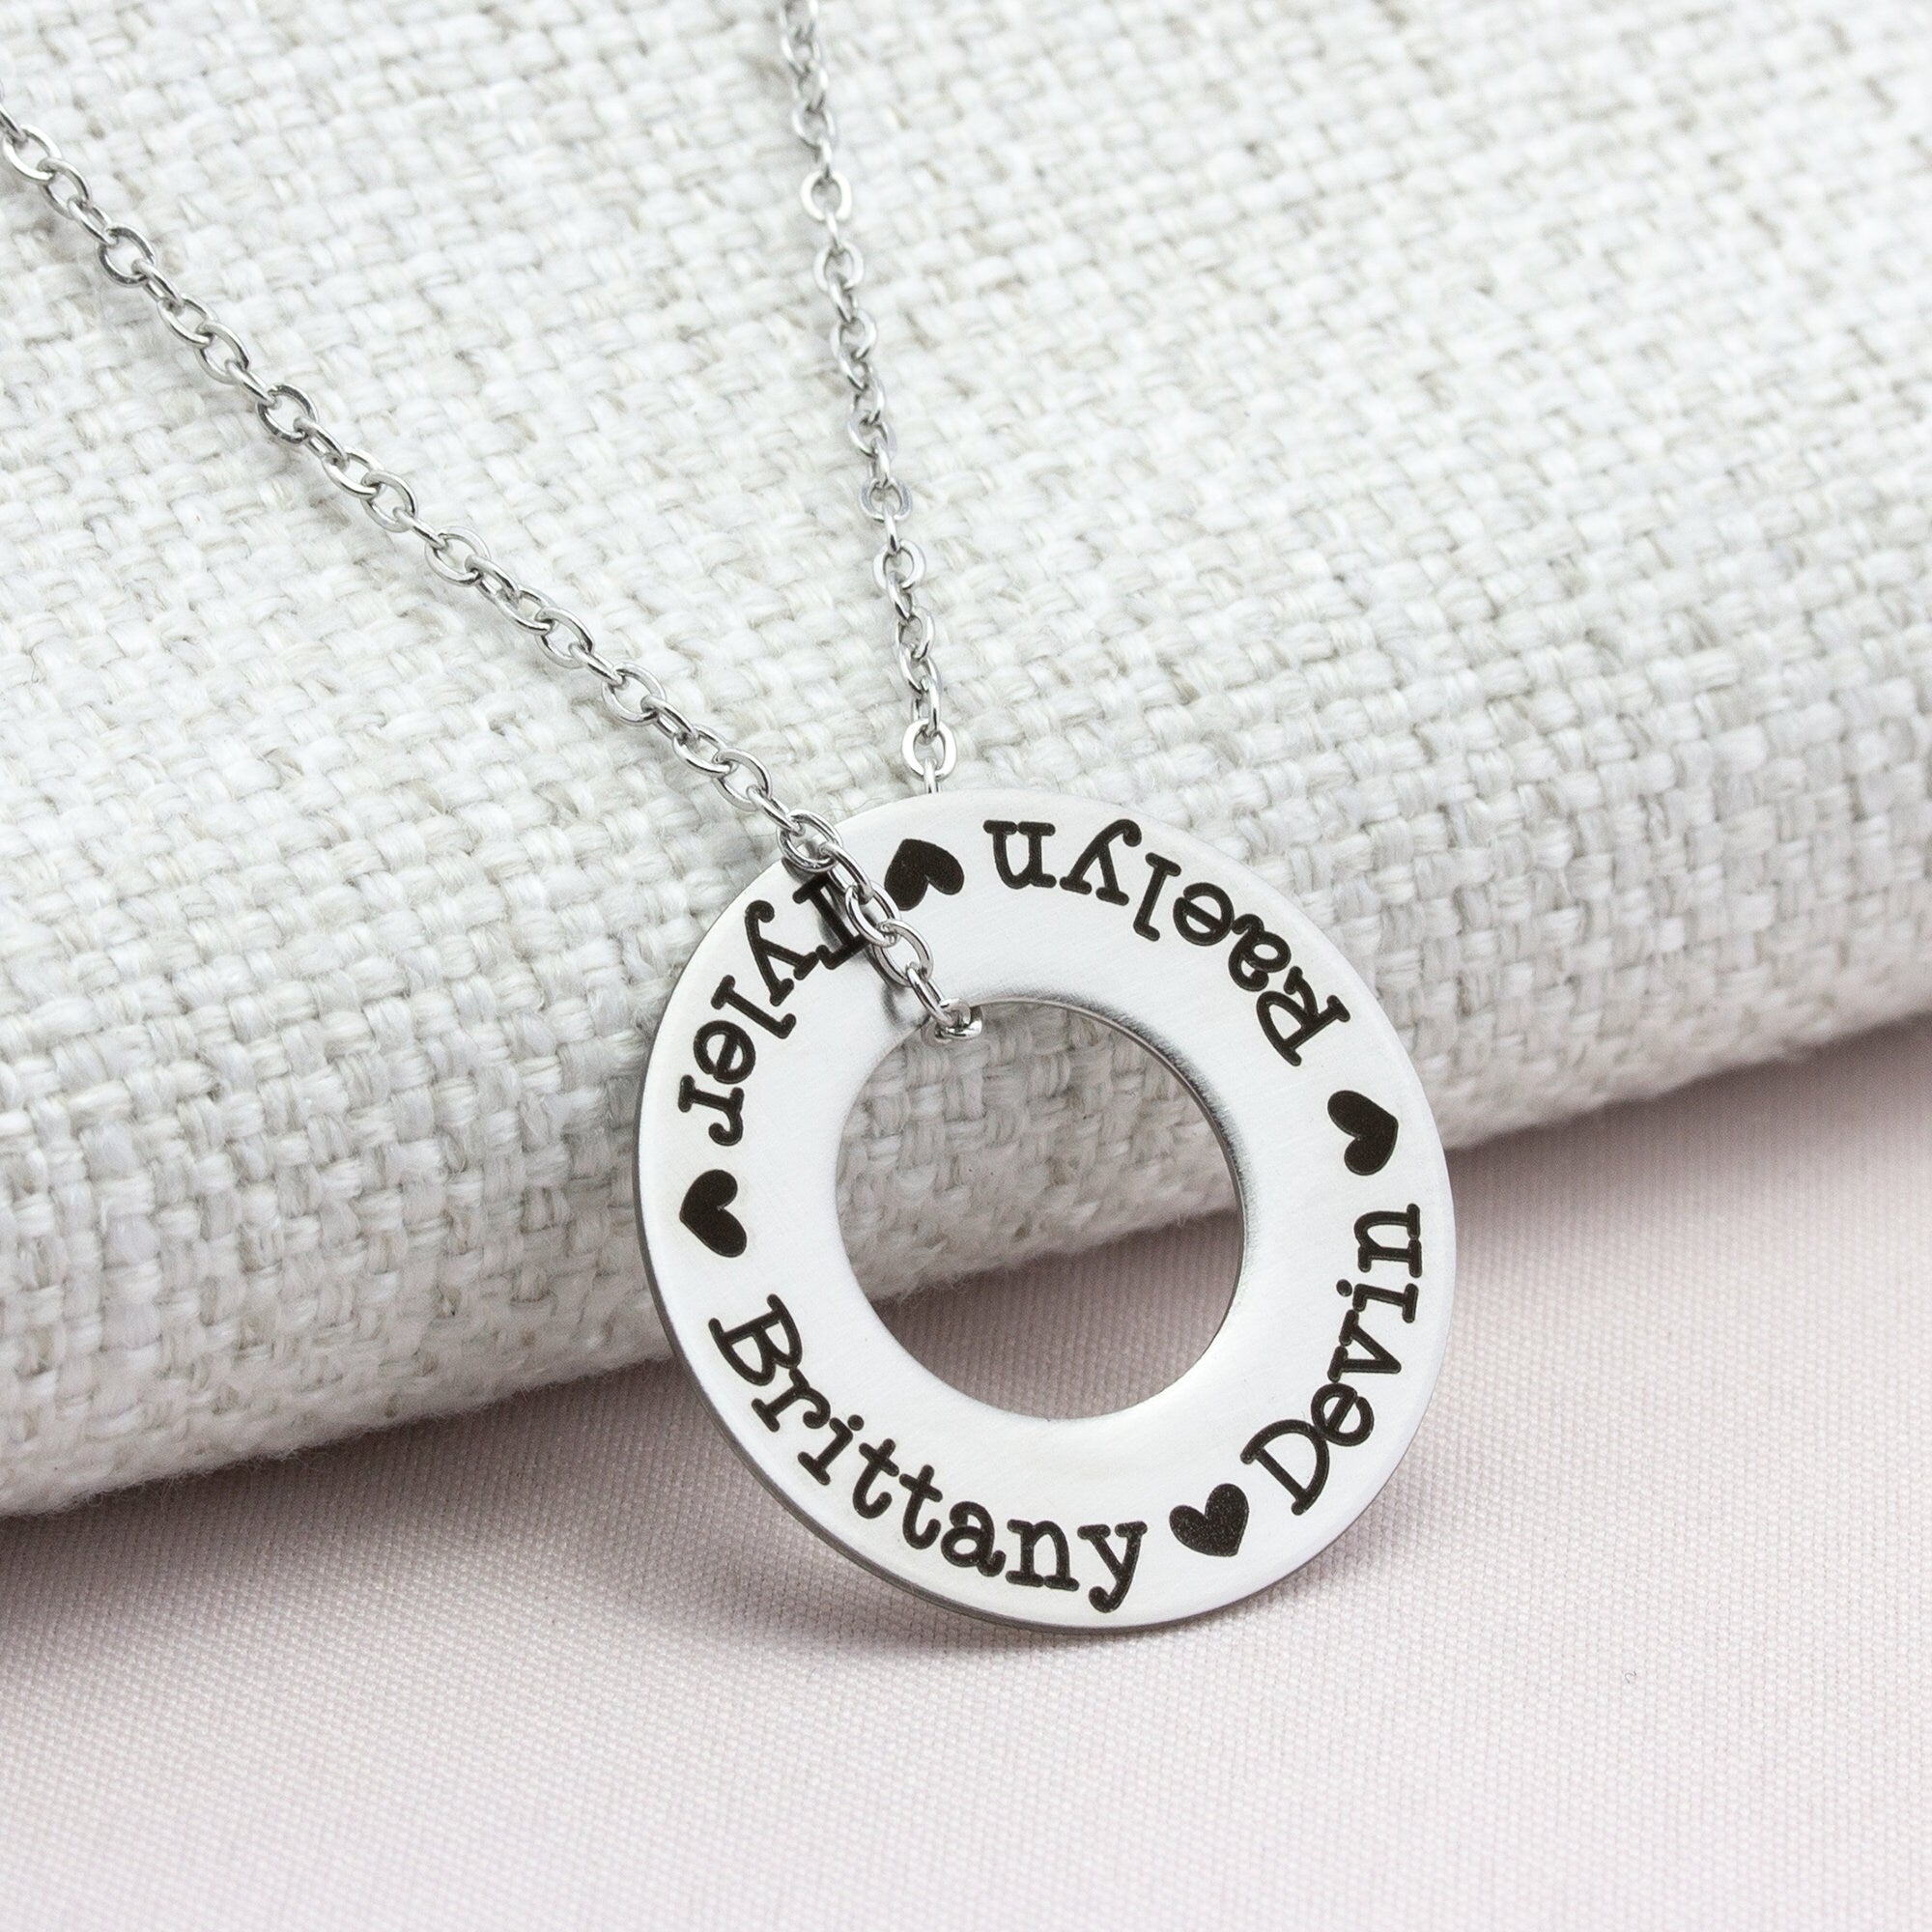 Mother's Necklace with Kids' Names - 4 Rings